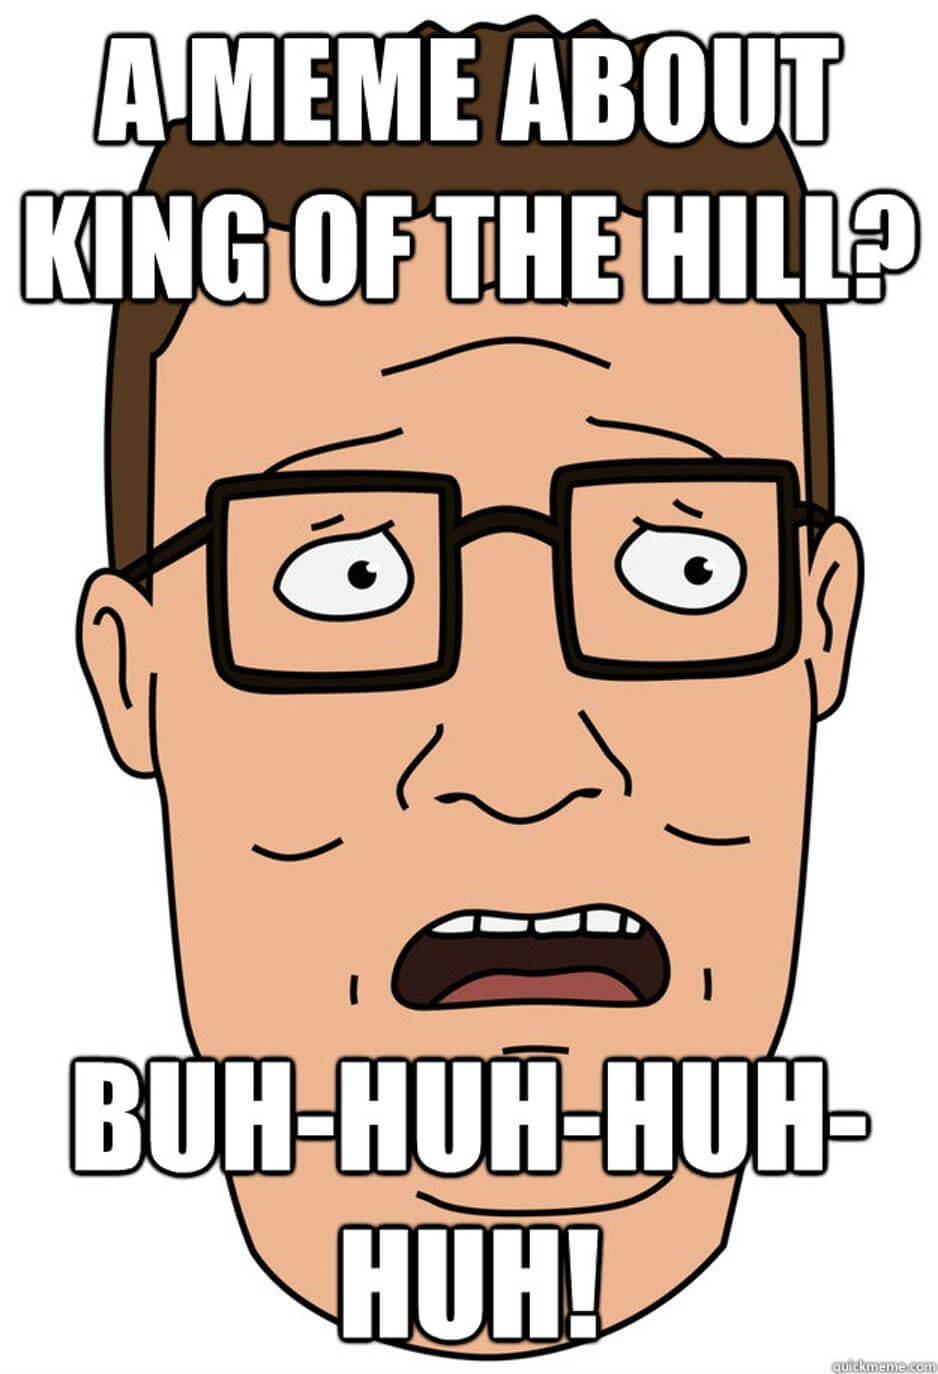 18-king-of-the-hill-memes-that-prove-a-tv-show-about-propane-can-work